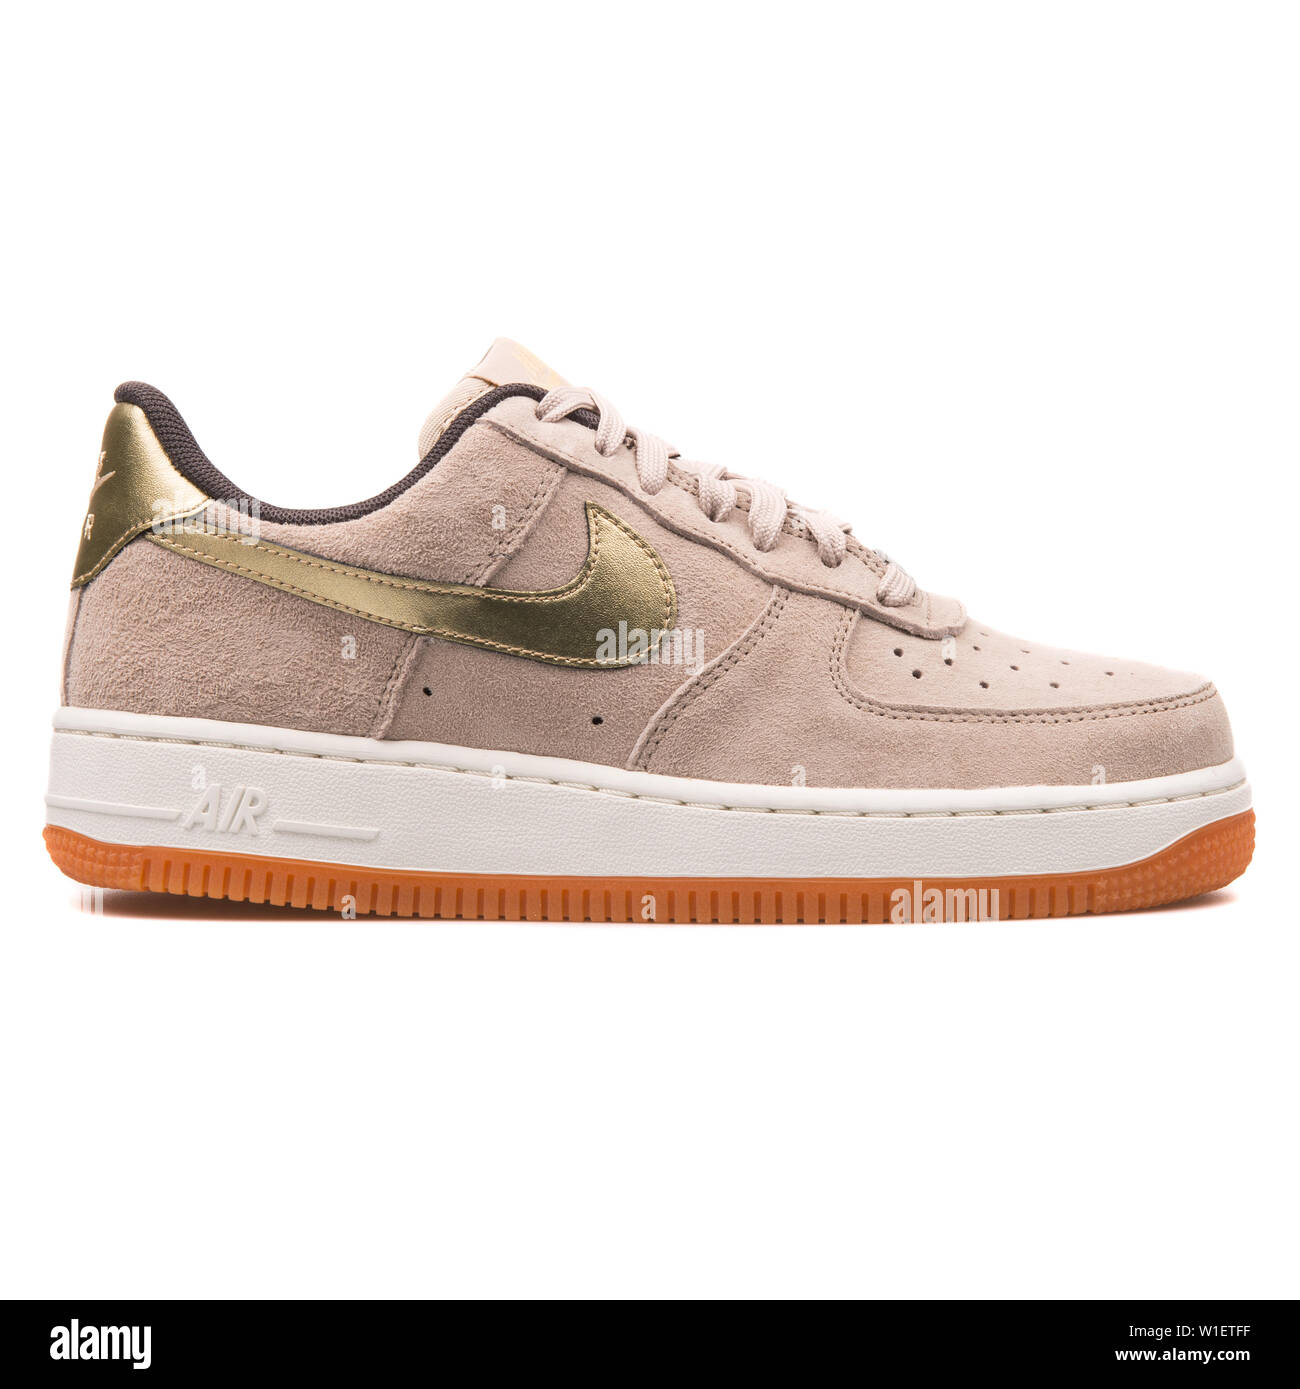 VIENNA, AUSTRIA - AUGUST 10, 2017: Nike Air Force 1 07 Premium Suede beige  and gold sneaker on white background Stock Photo - Alamy